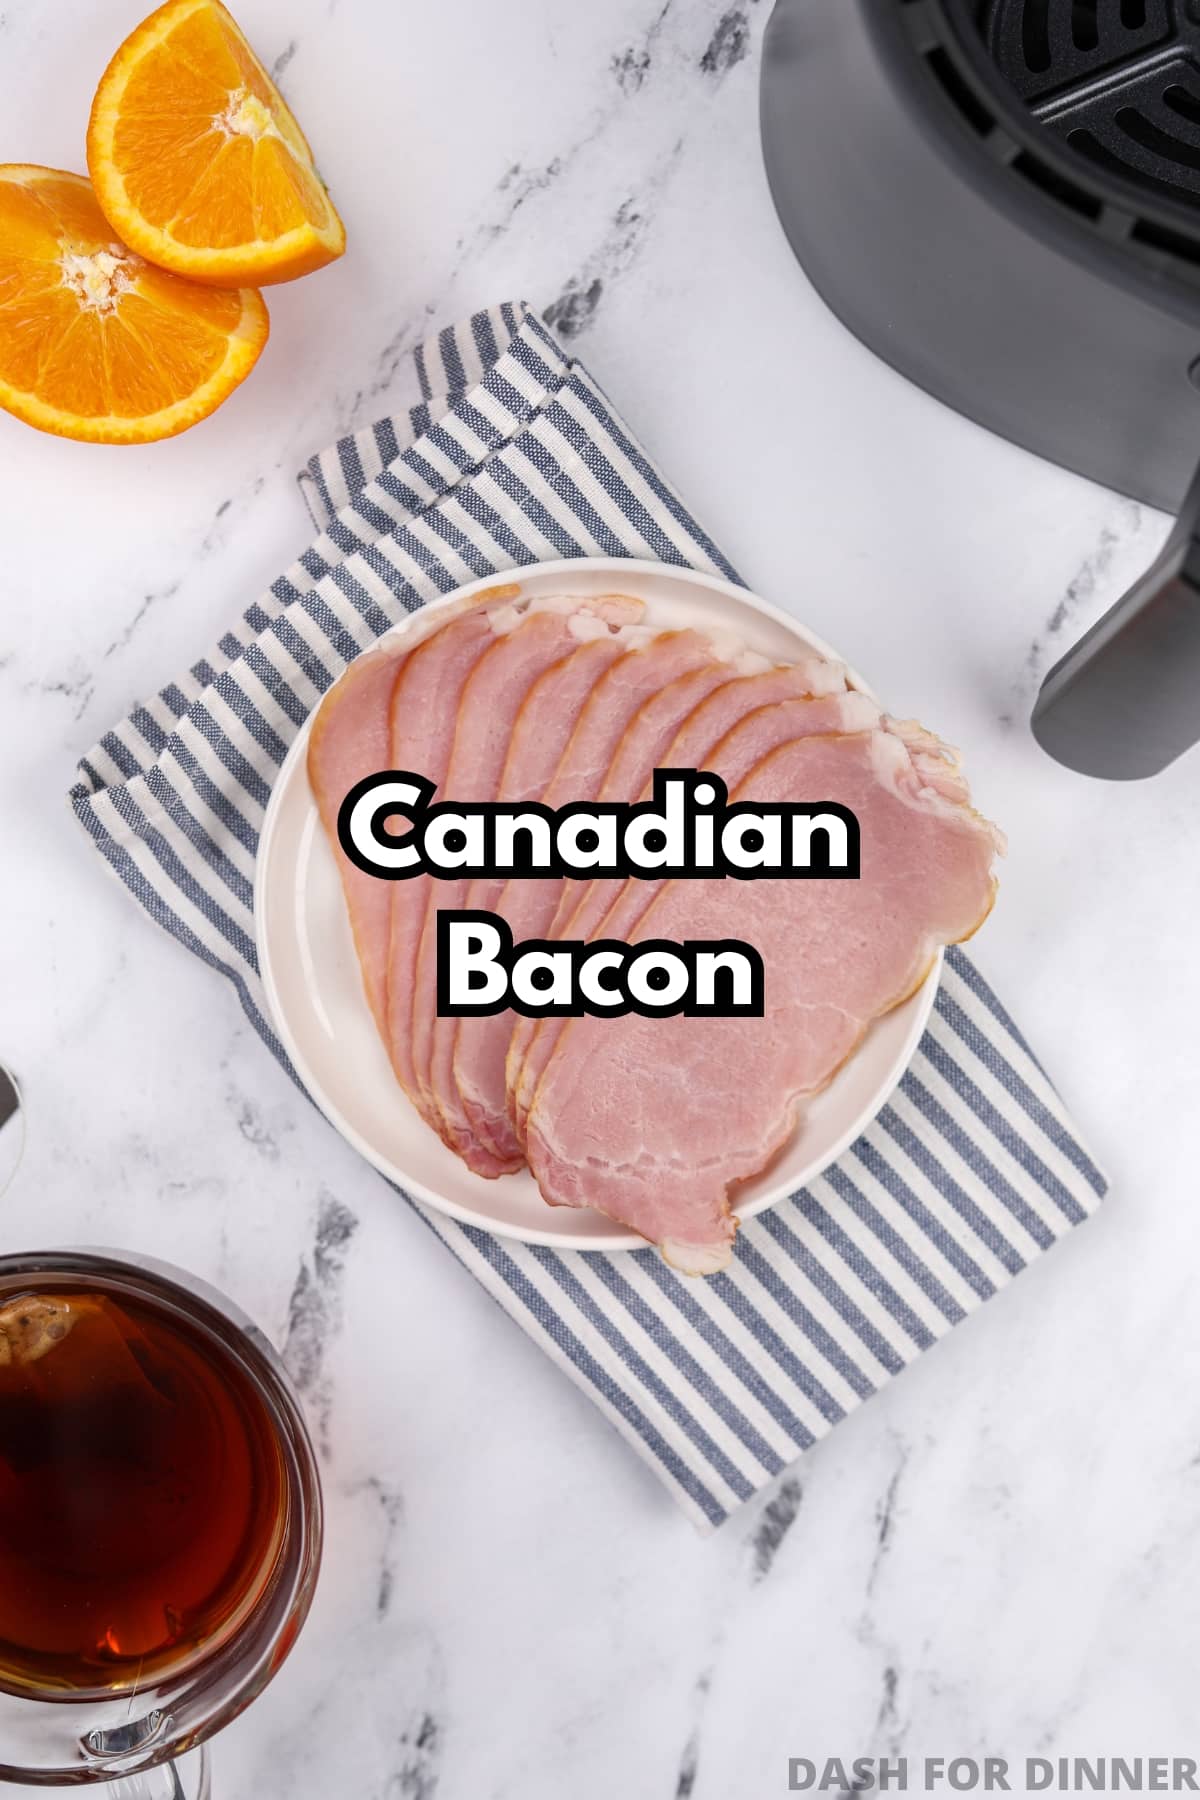 A plate with several slices of uncooked Canadian bacon.